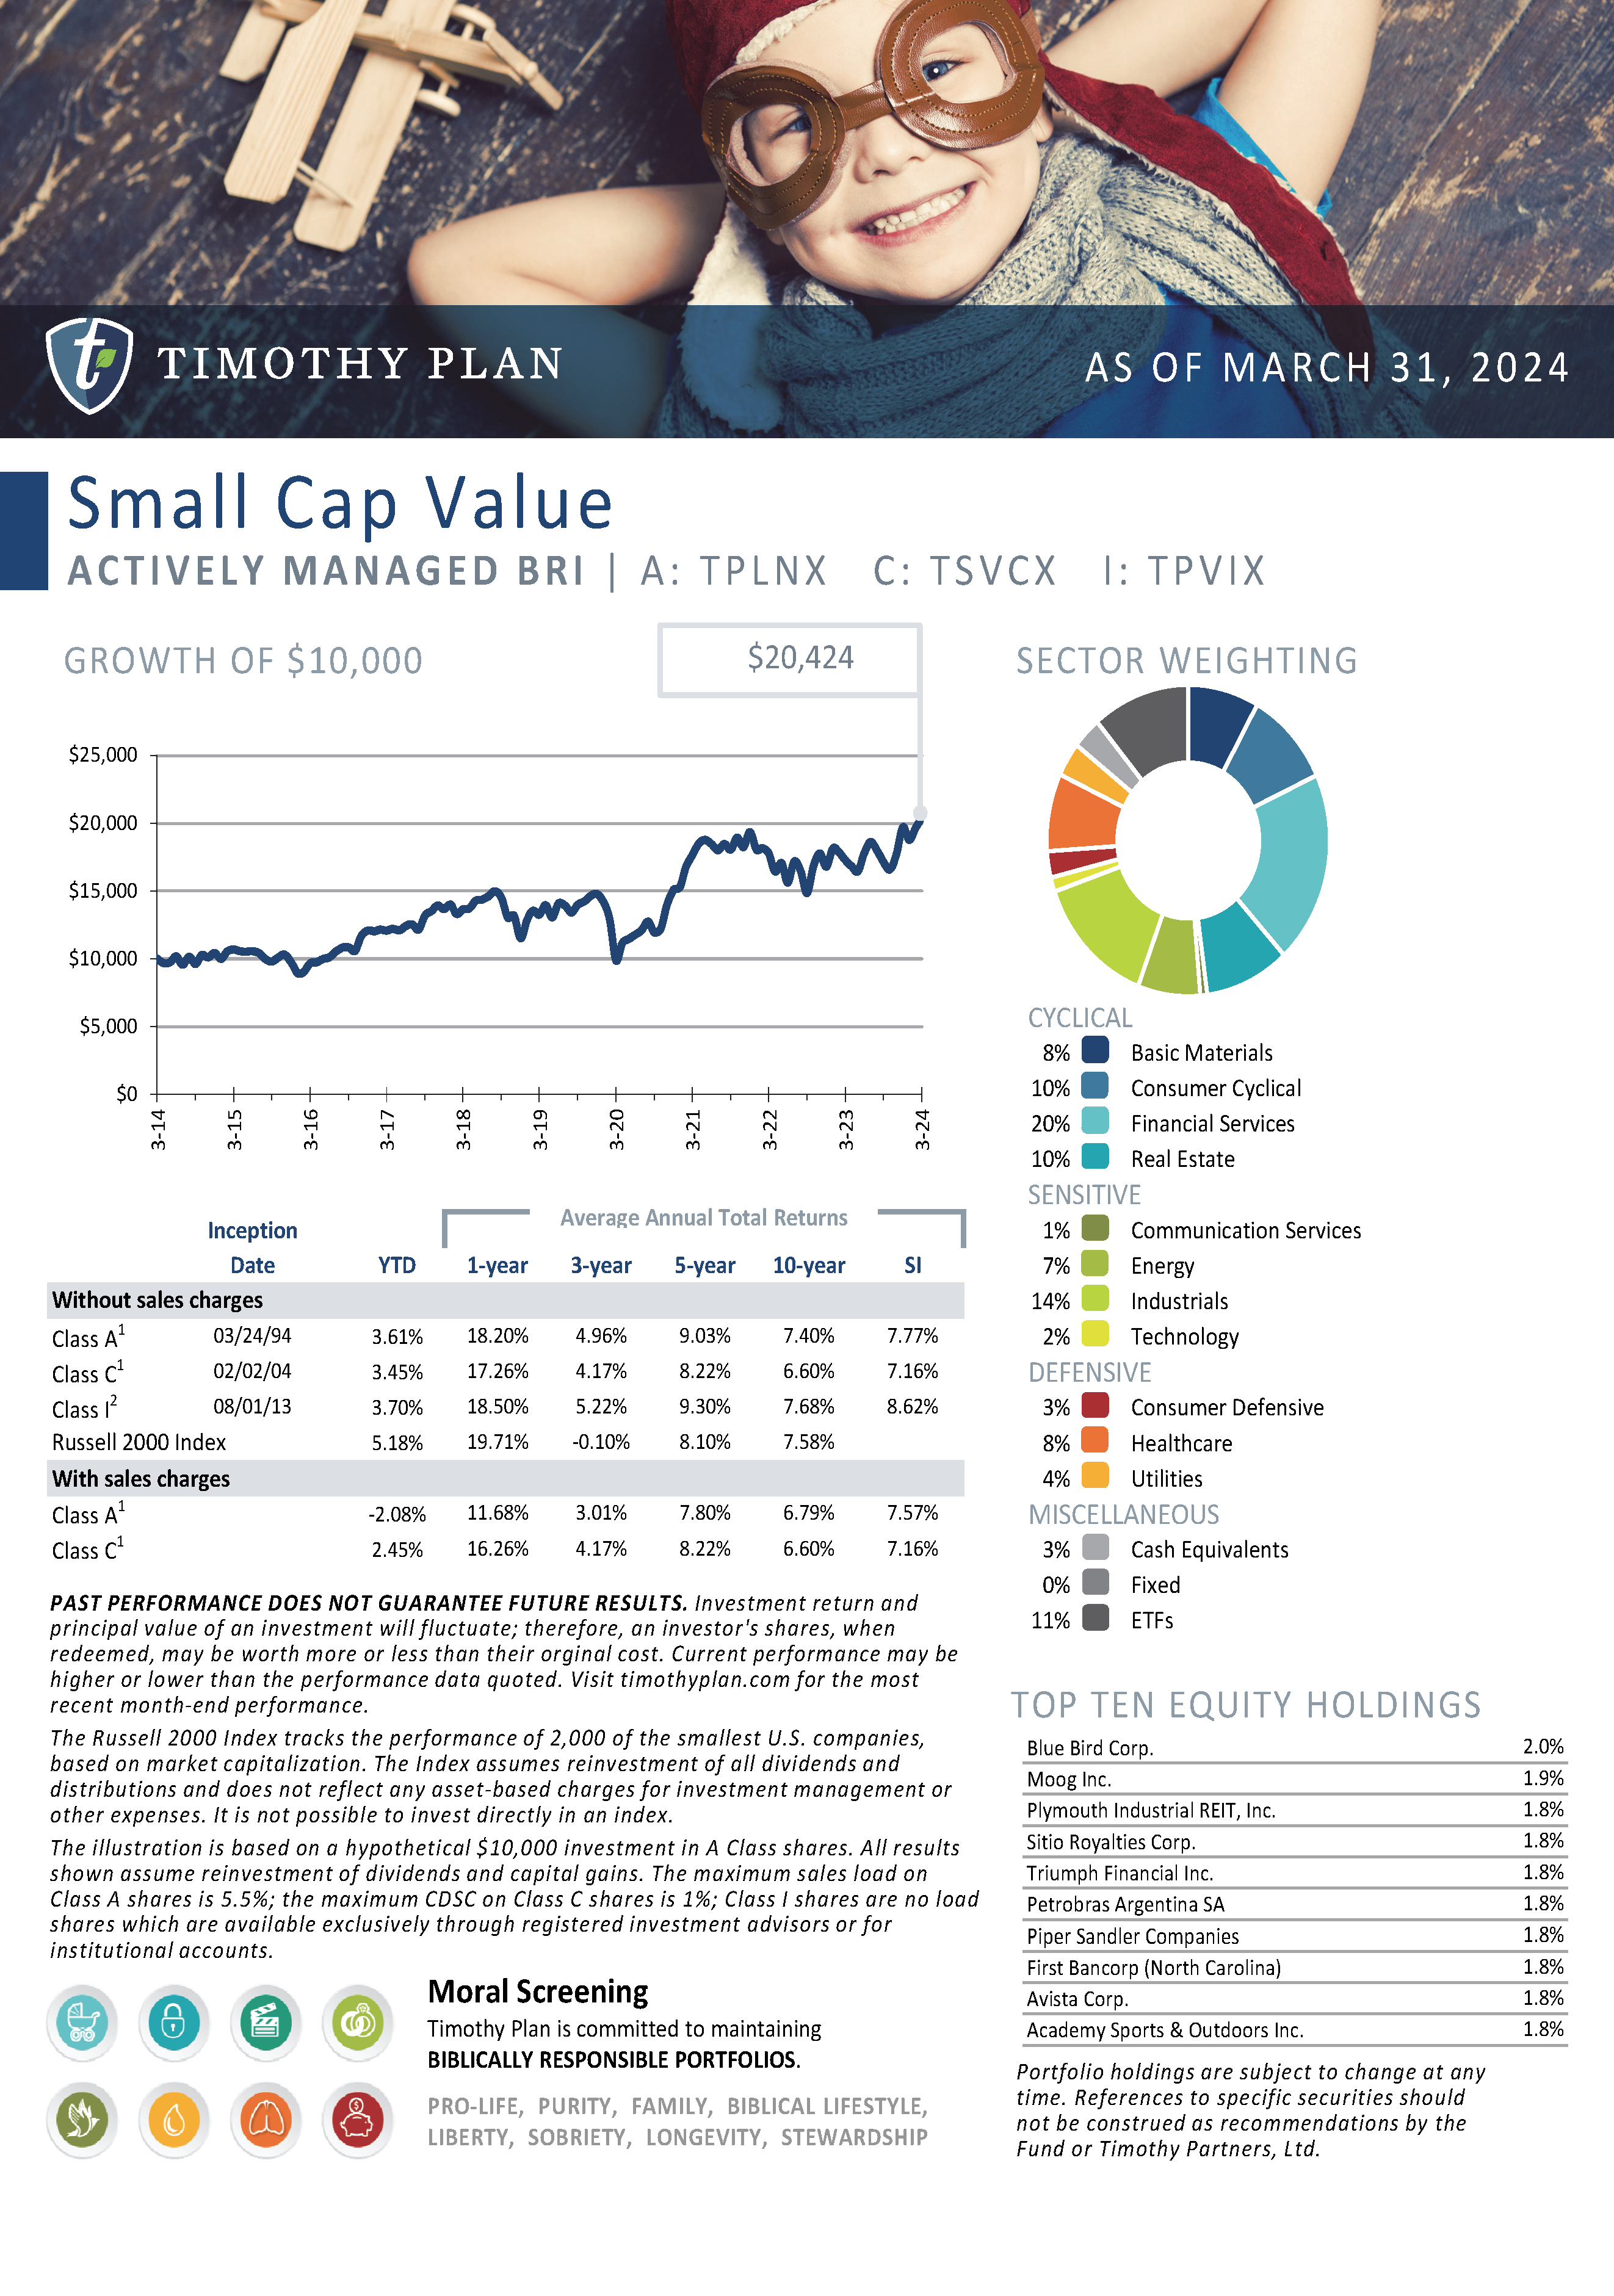 Small Cap Value page 1